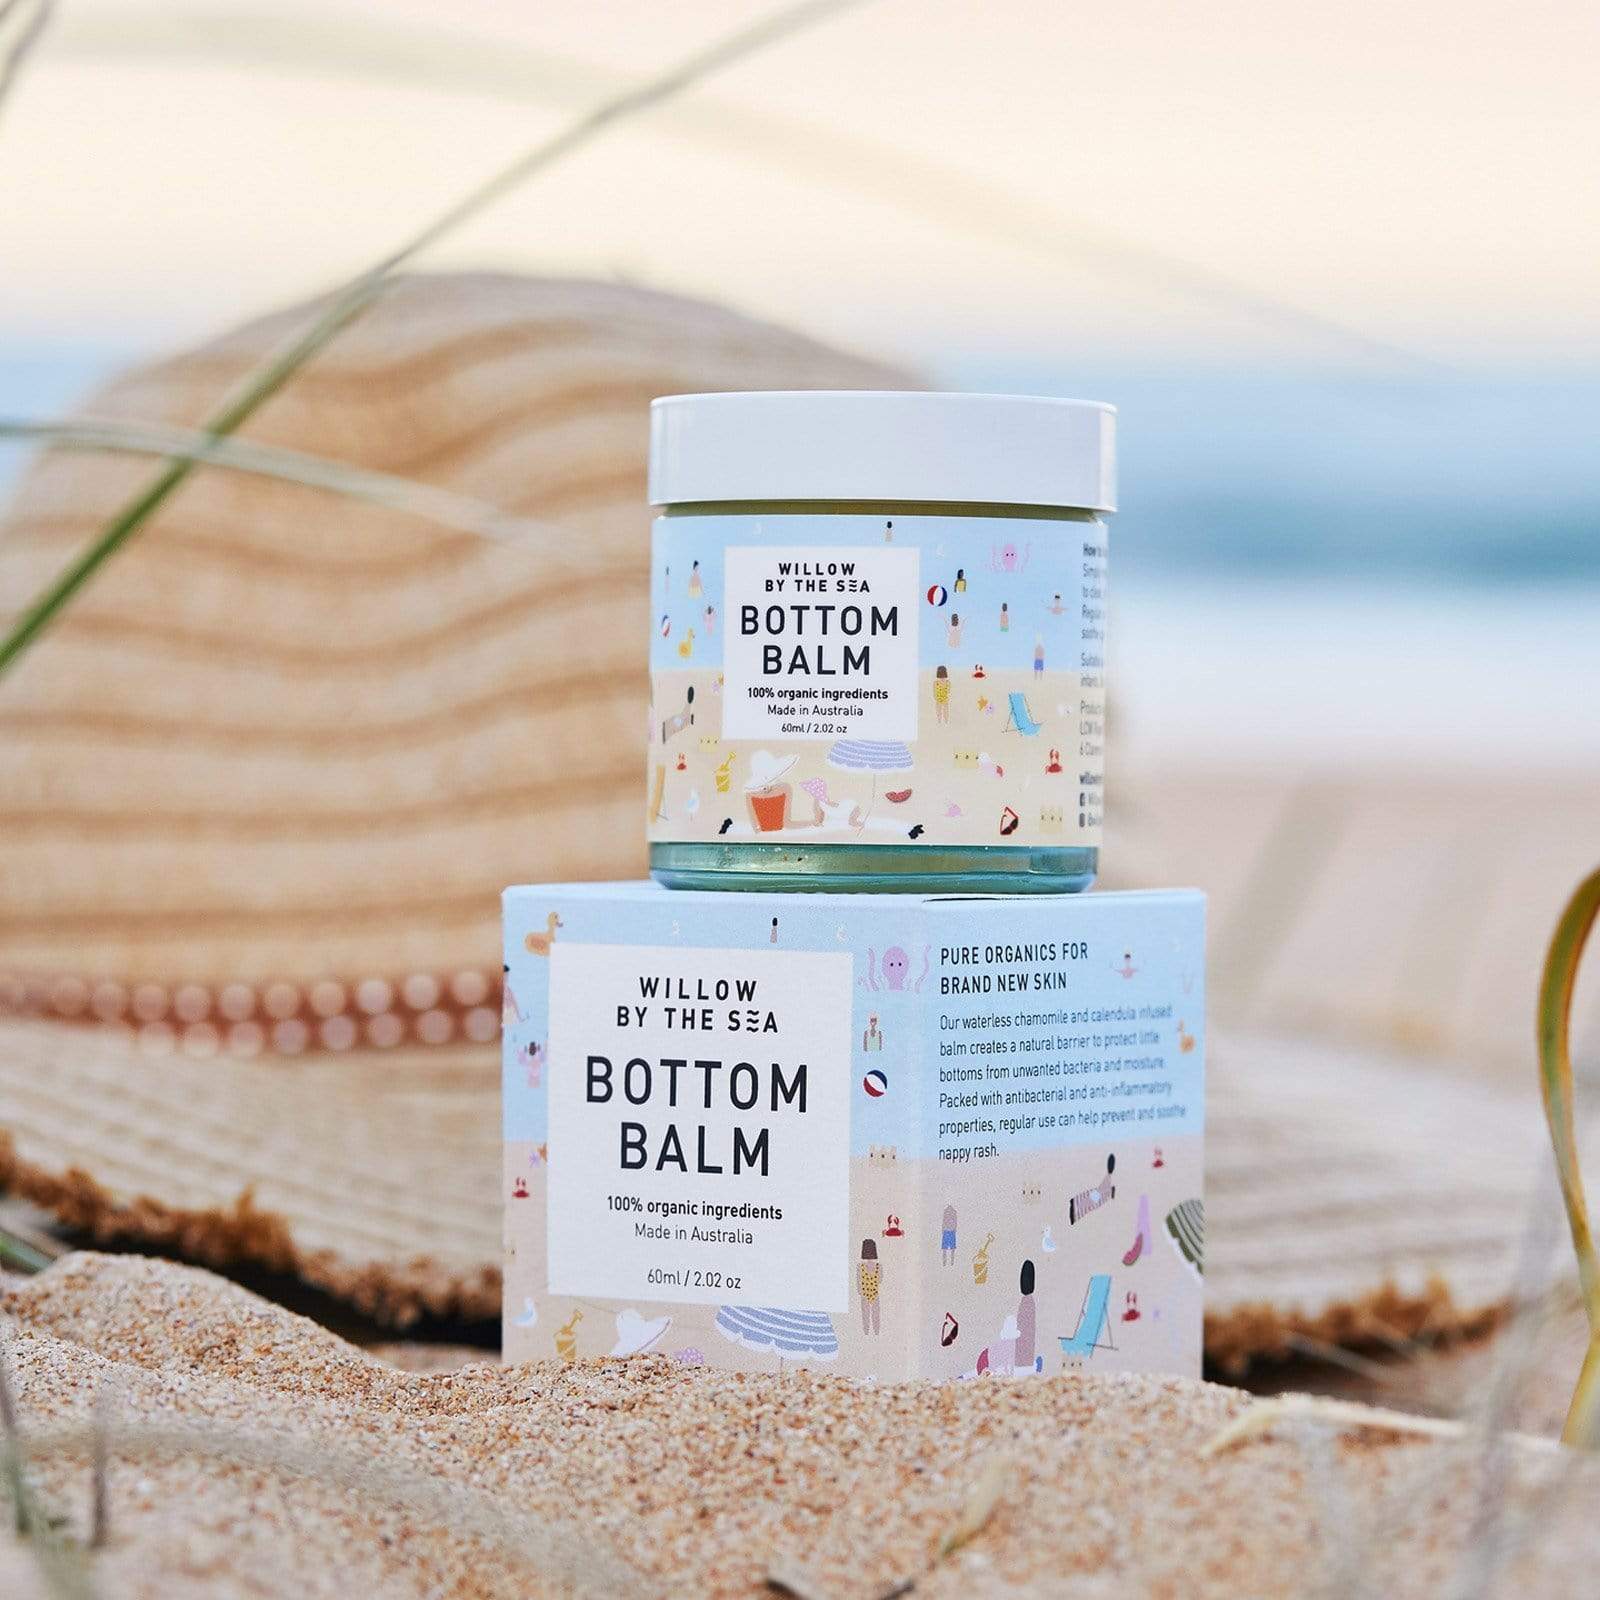 Willow By The Sea Baby Care Bottom Balm - Small (60ml)